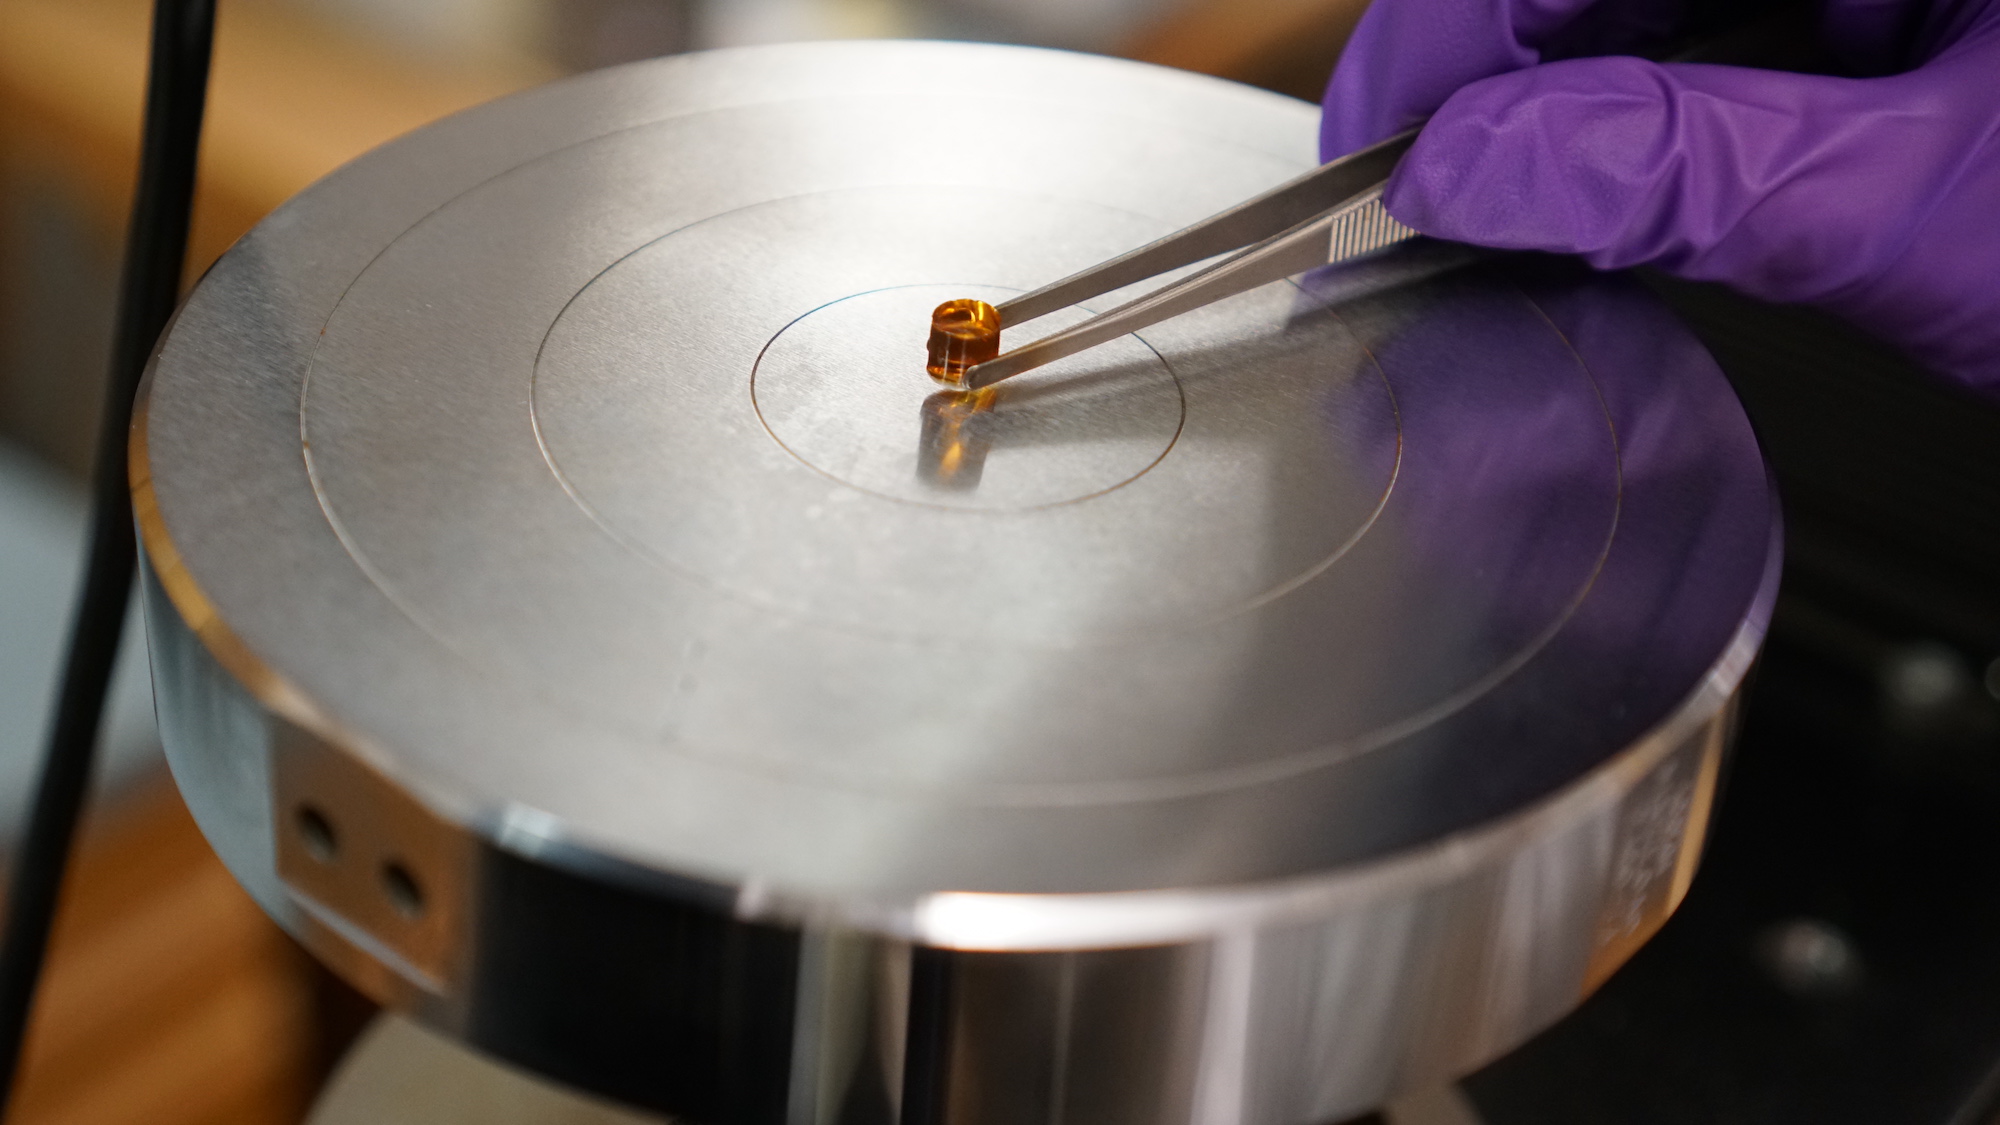 Using a pair of tweezers, a researcher is placing the tiny copper coloured hydrogel on a compression machine.